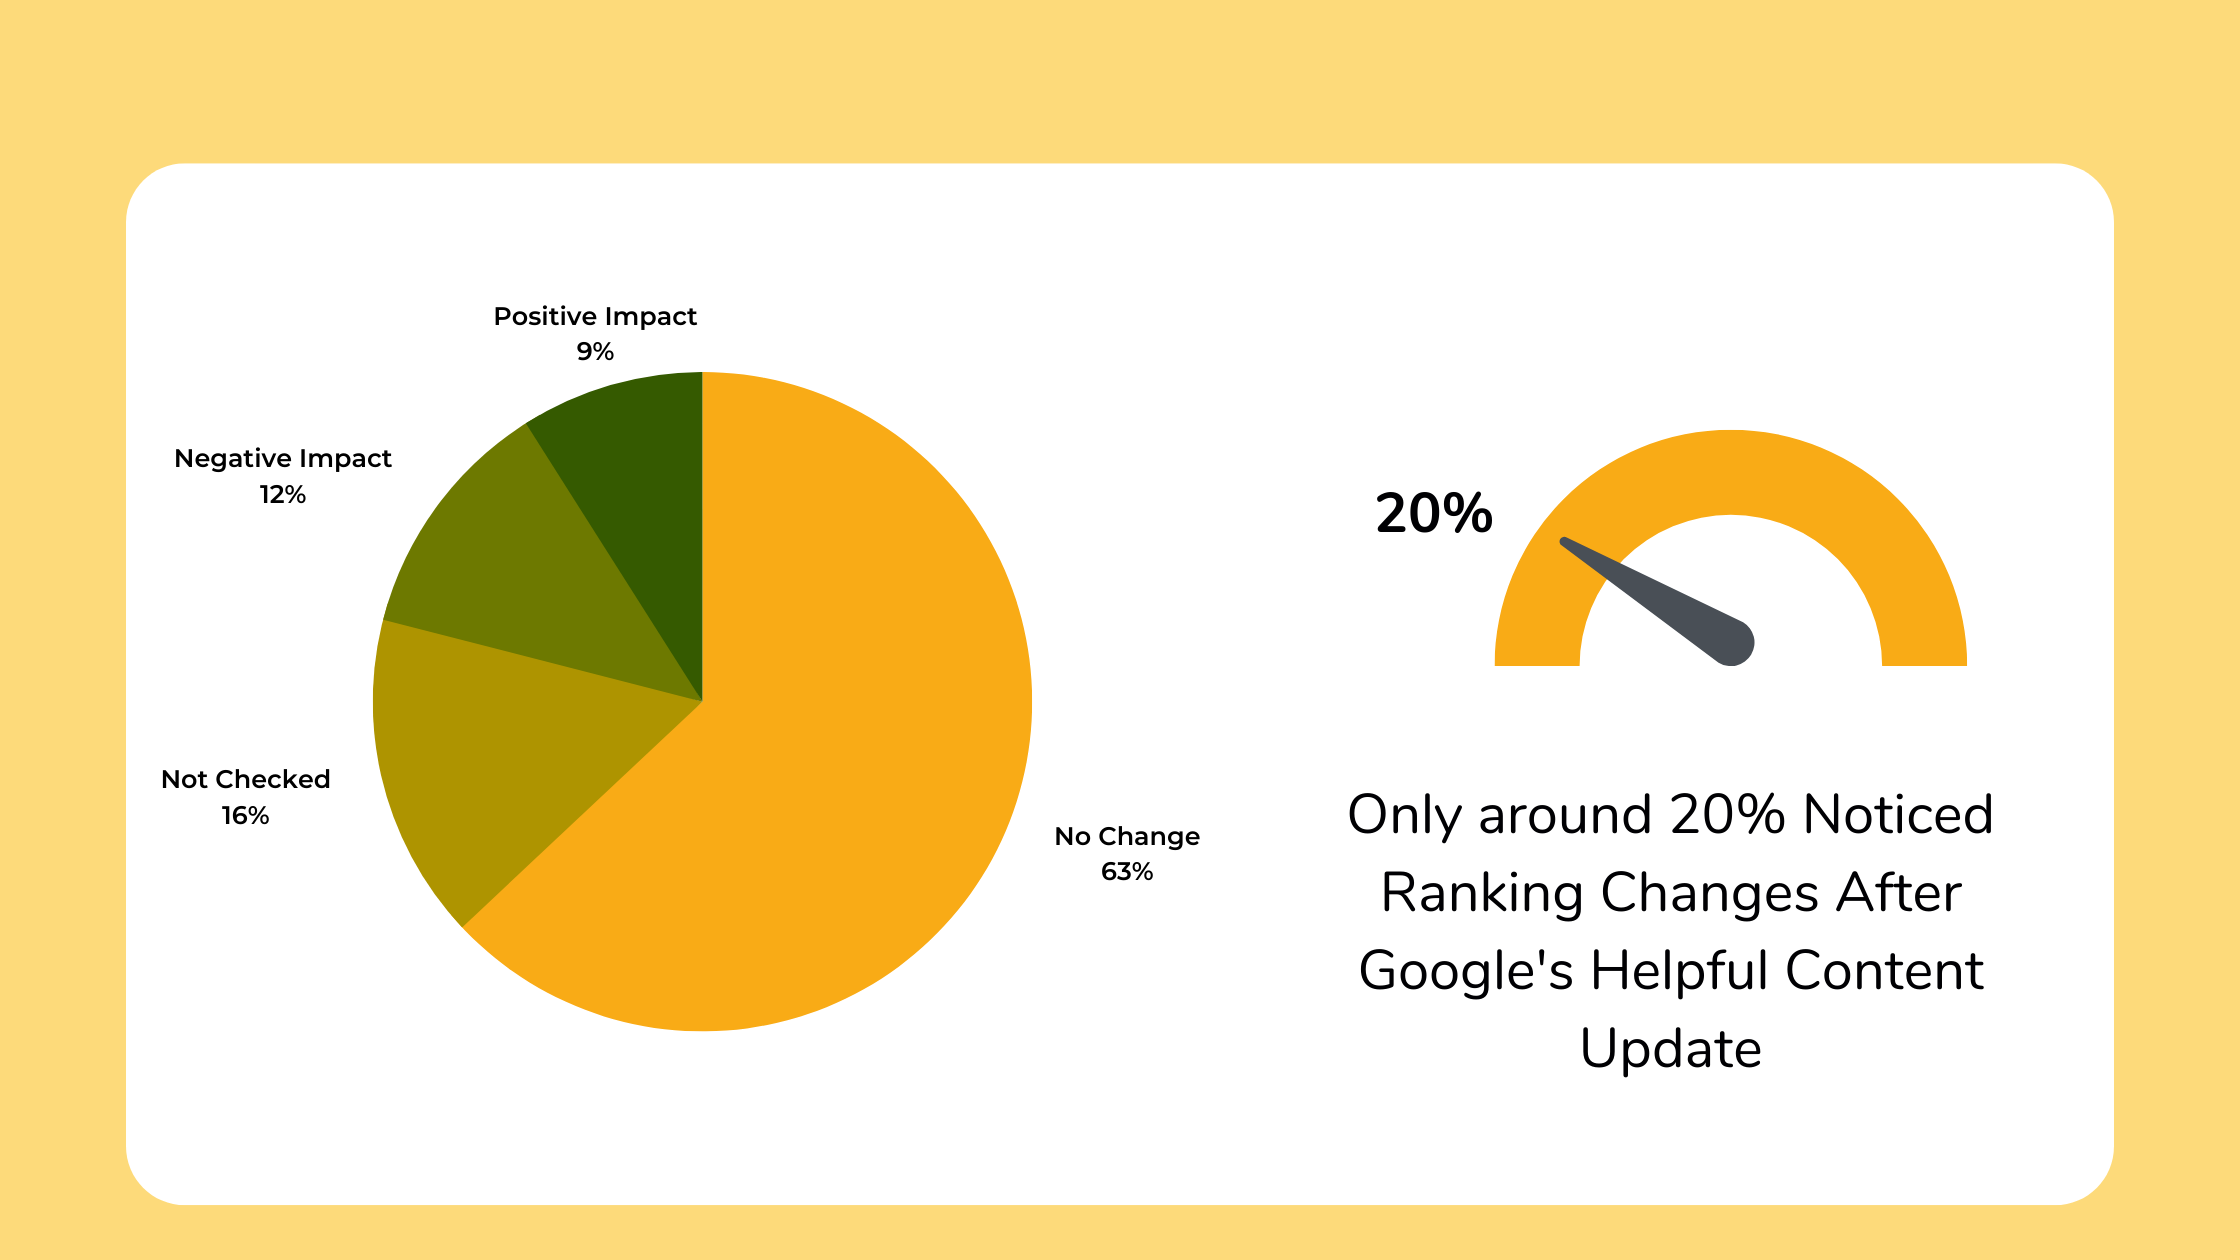 Only around 20% Noticed Ranking Changes After Google's Helpful Content Update- seo strategy